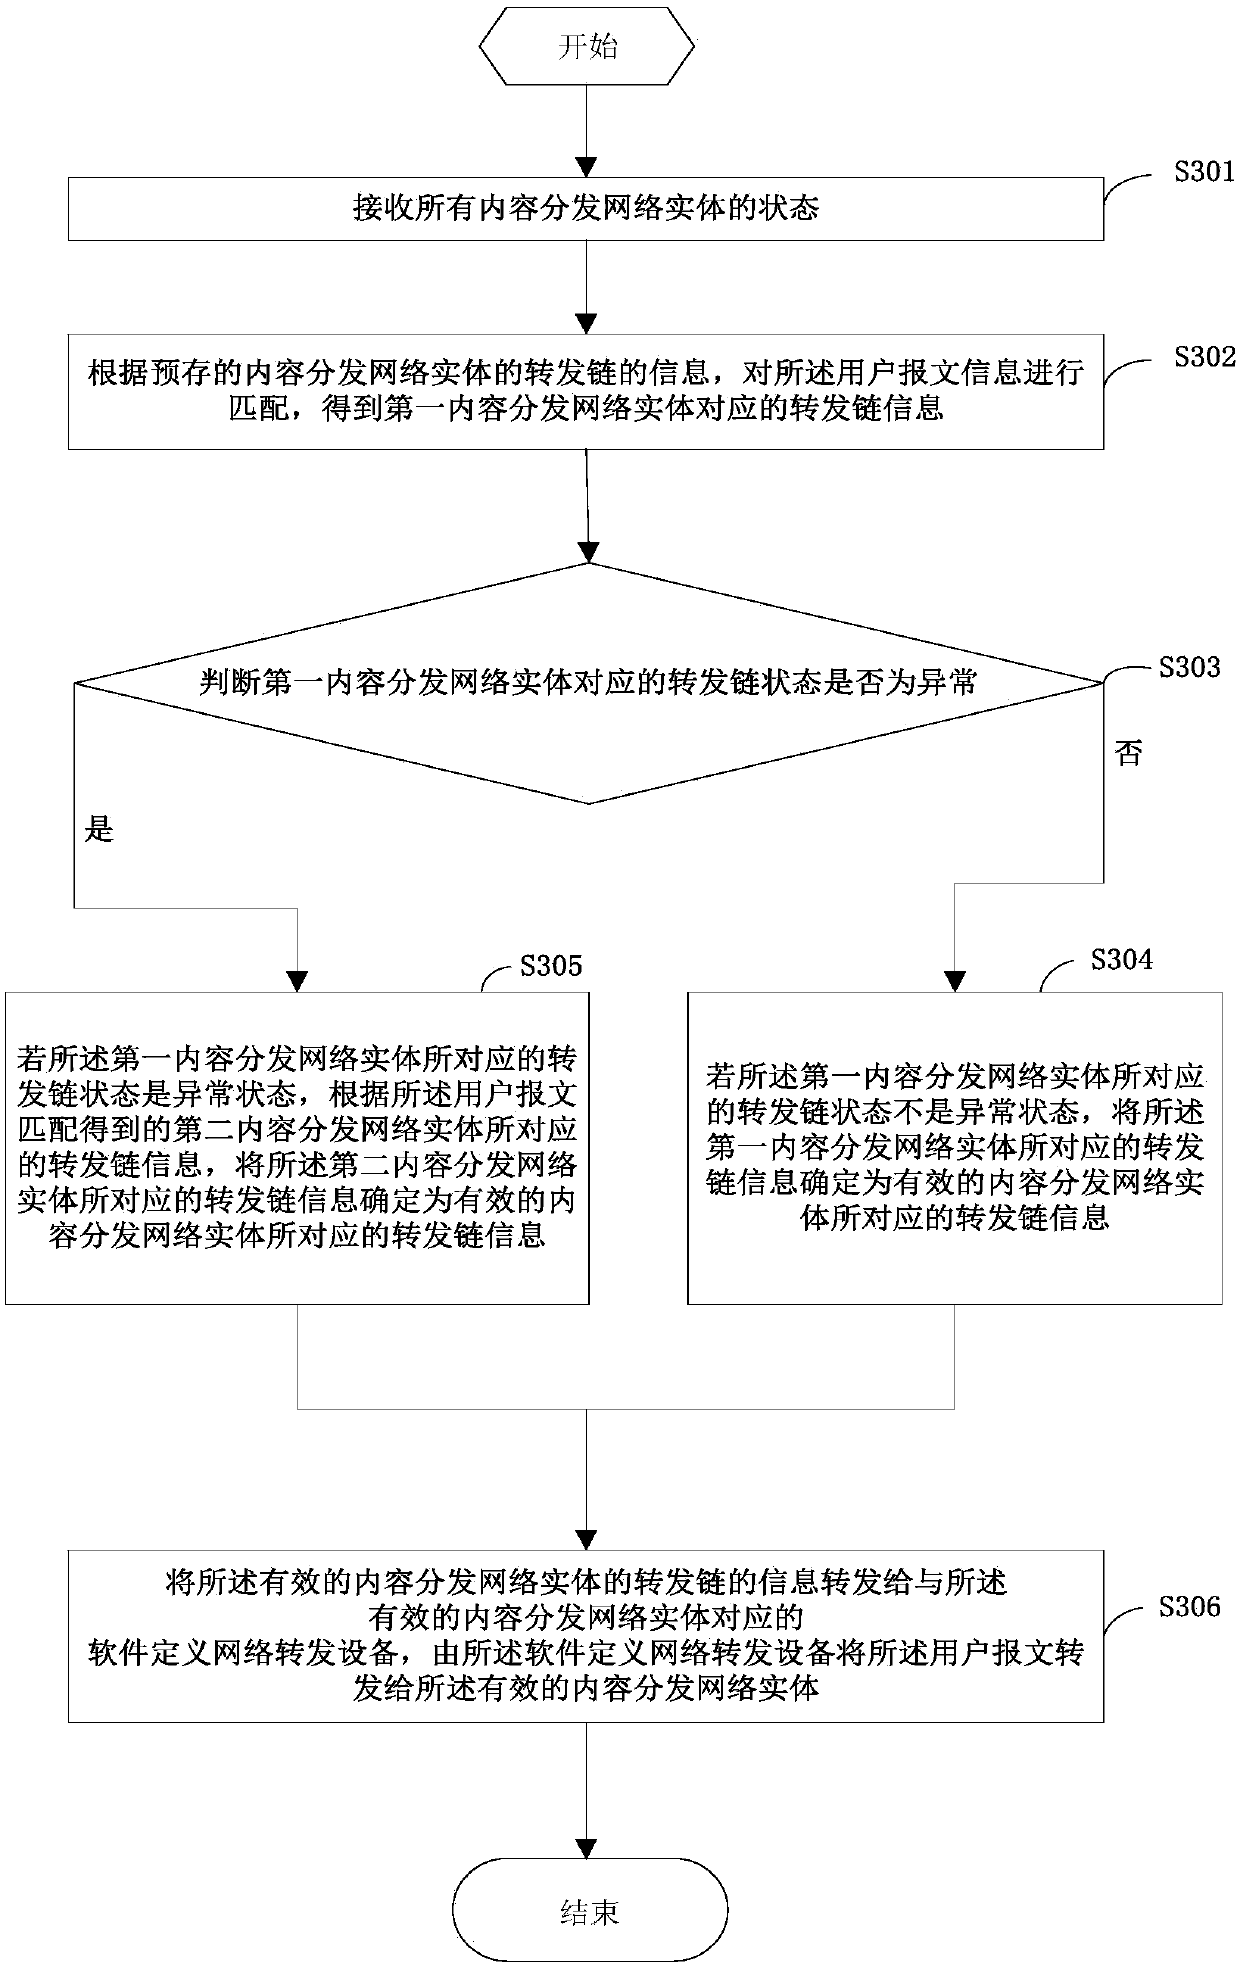 Content delivery network entity service processing method, device and system